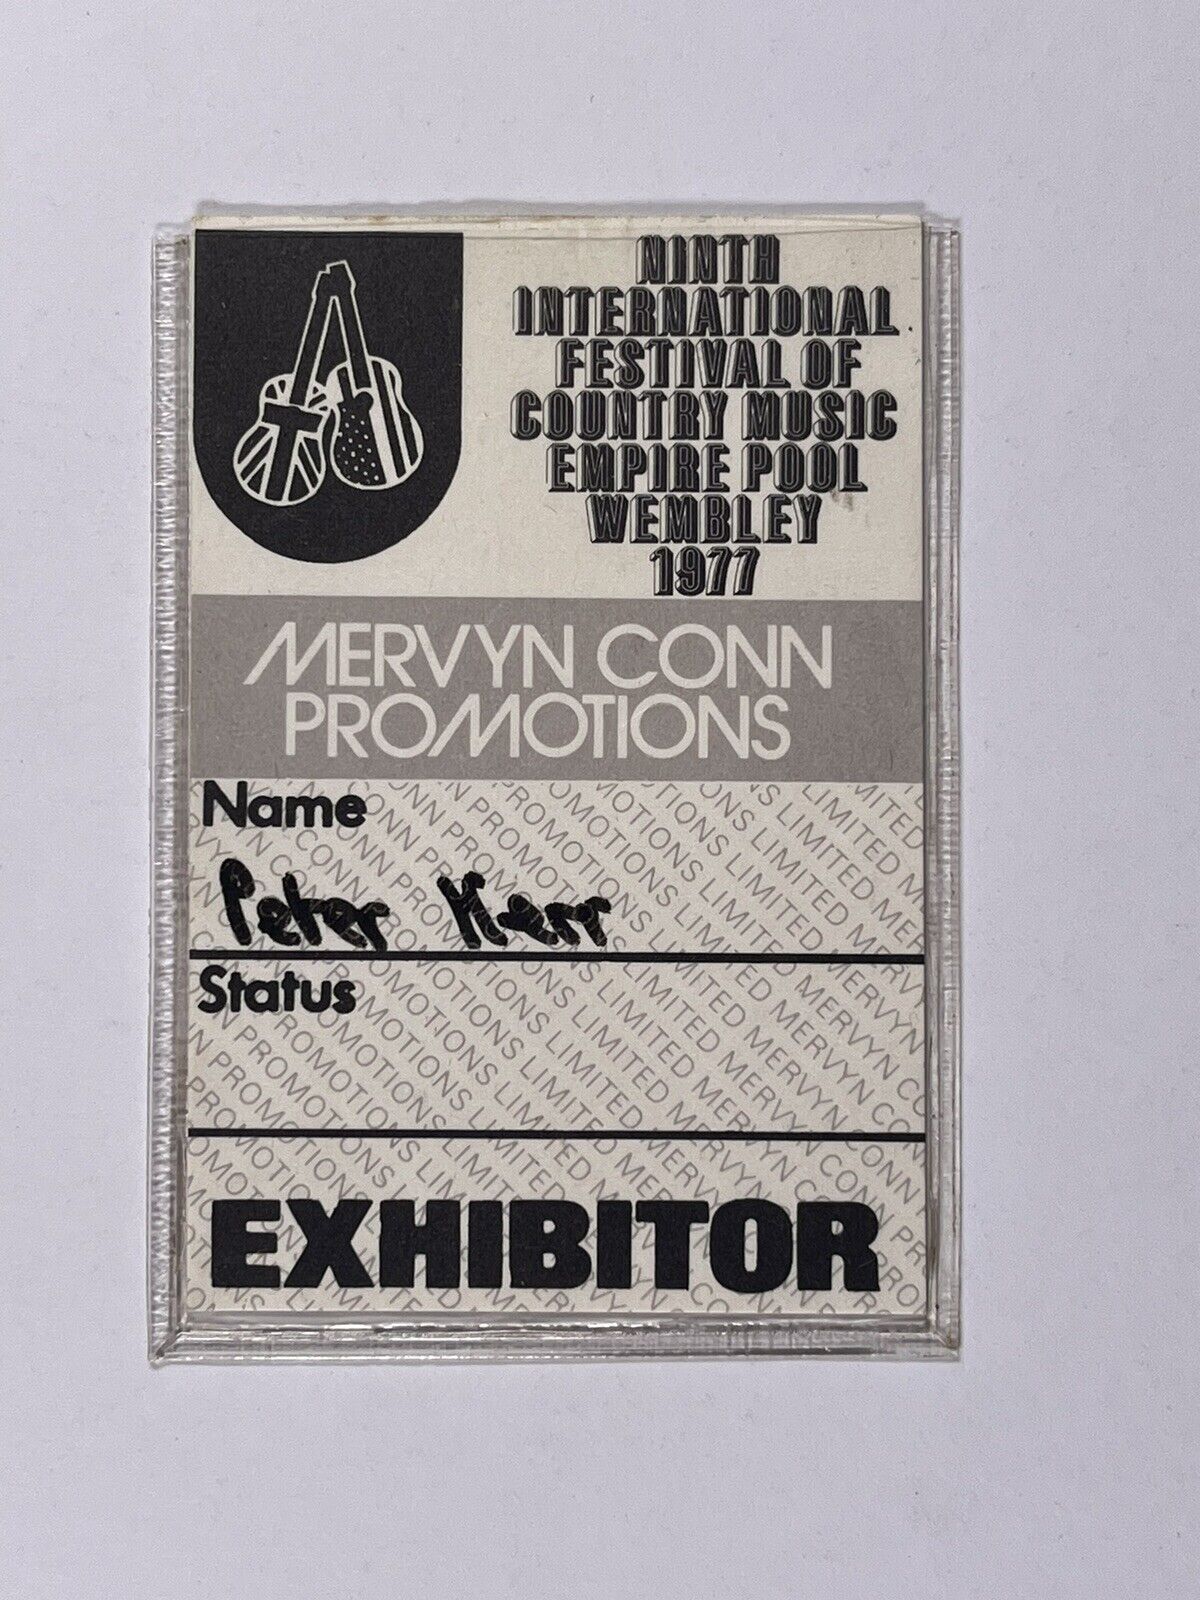 Festival Of Country Music Pass Peter Kerr Orig Empire Pool Wembley Stadium 1977